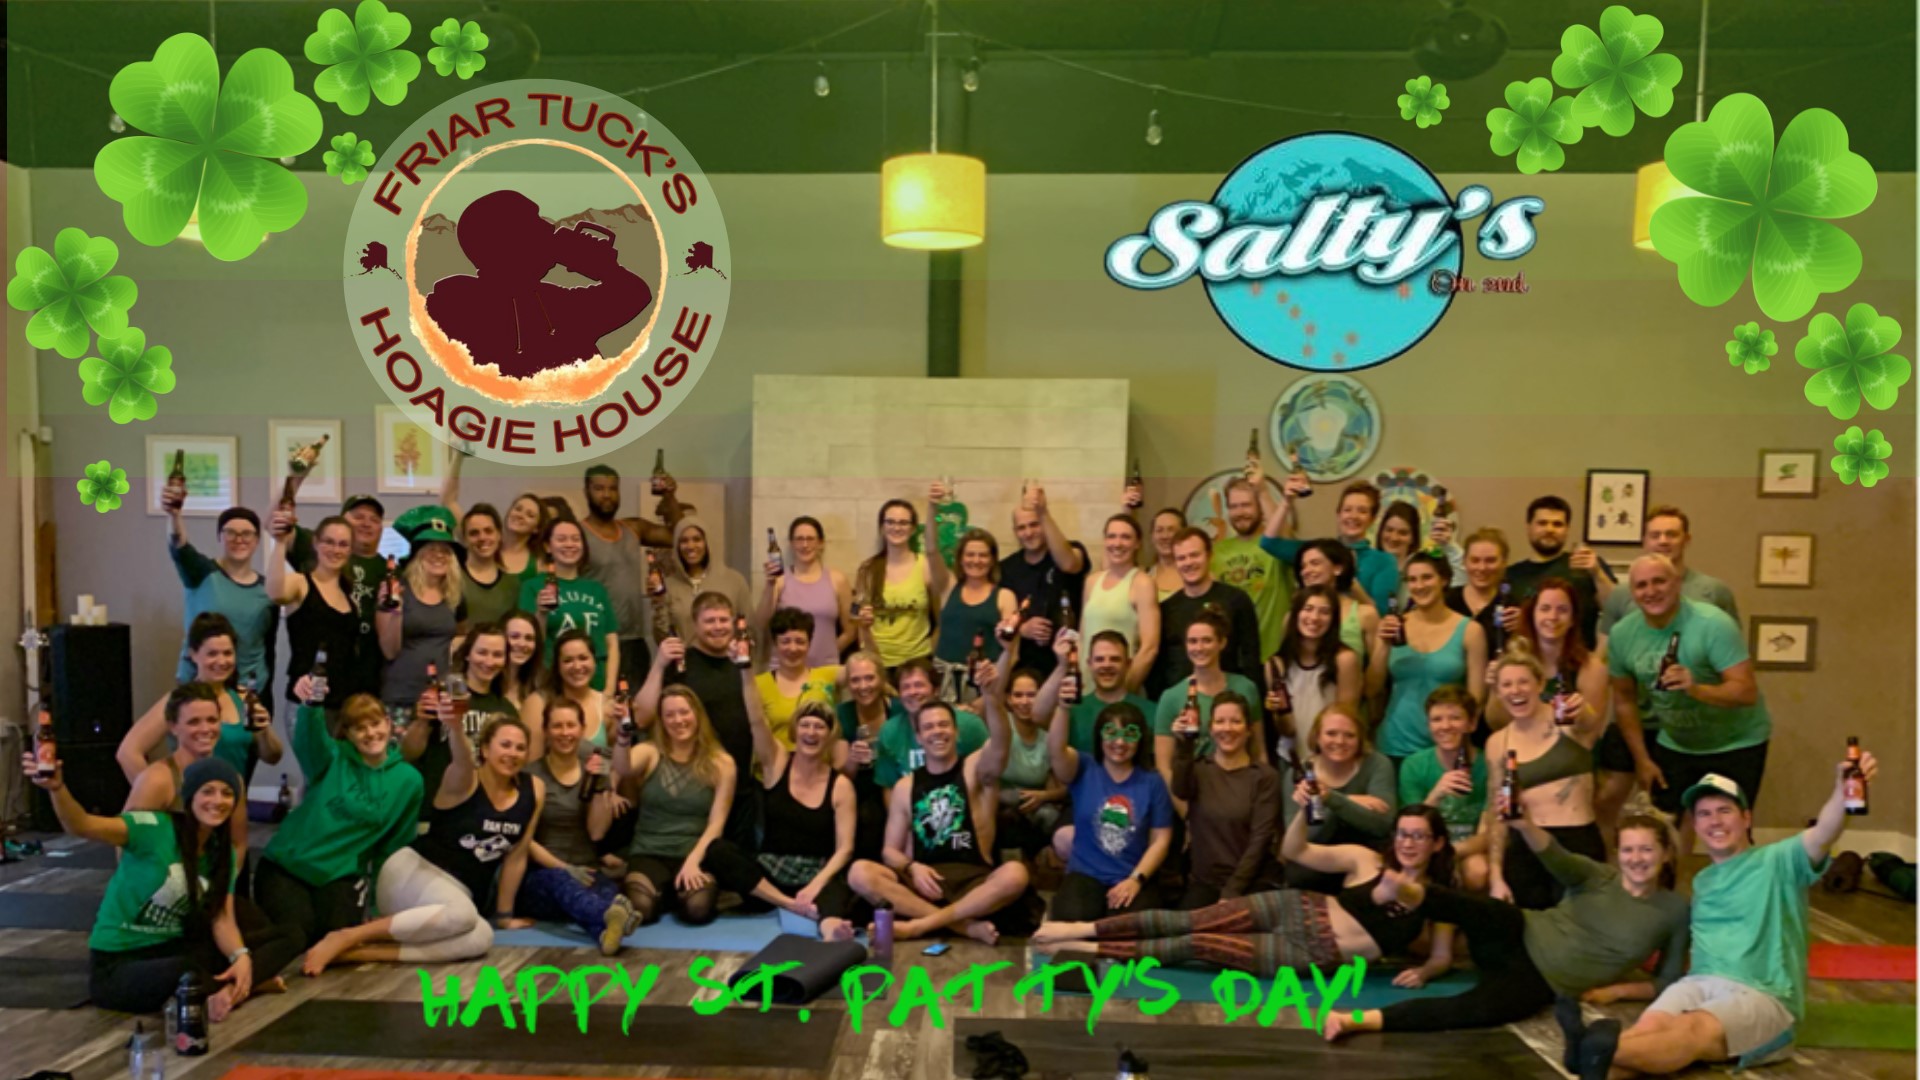 St. Patty's Beer Yoga @ Trax Outdoor Center